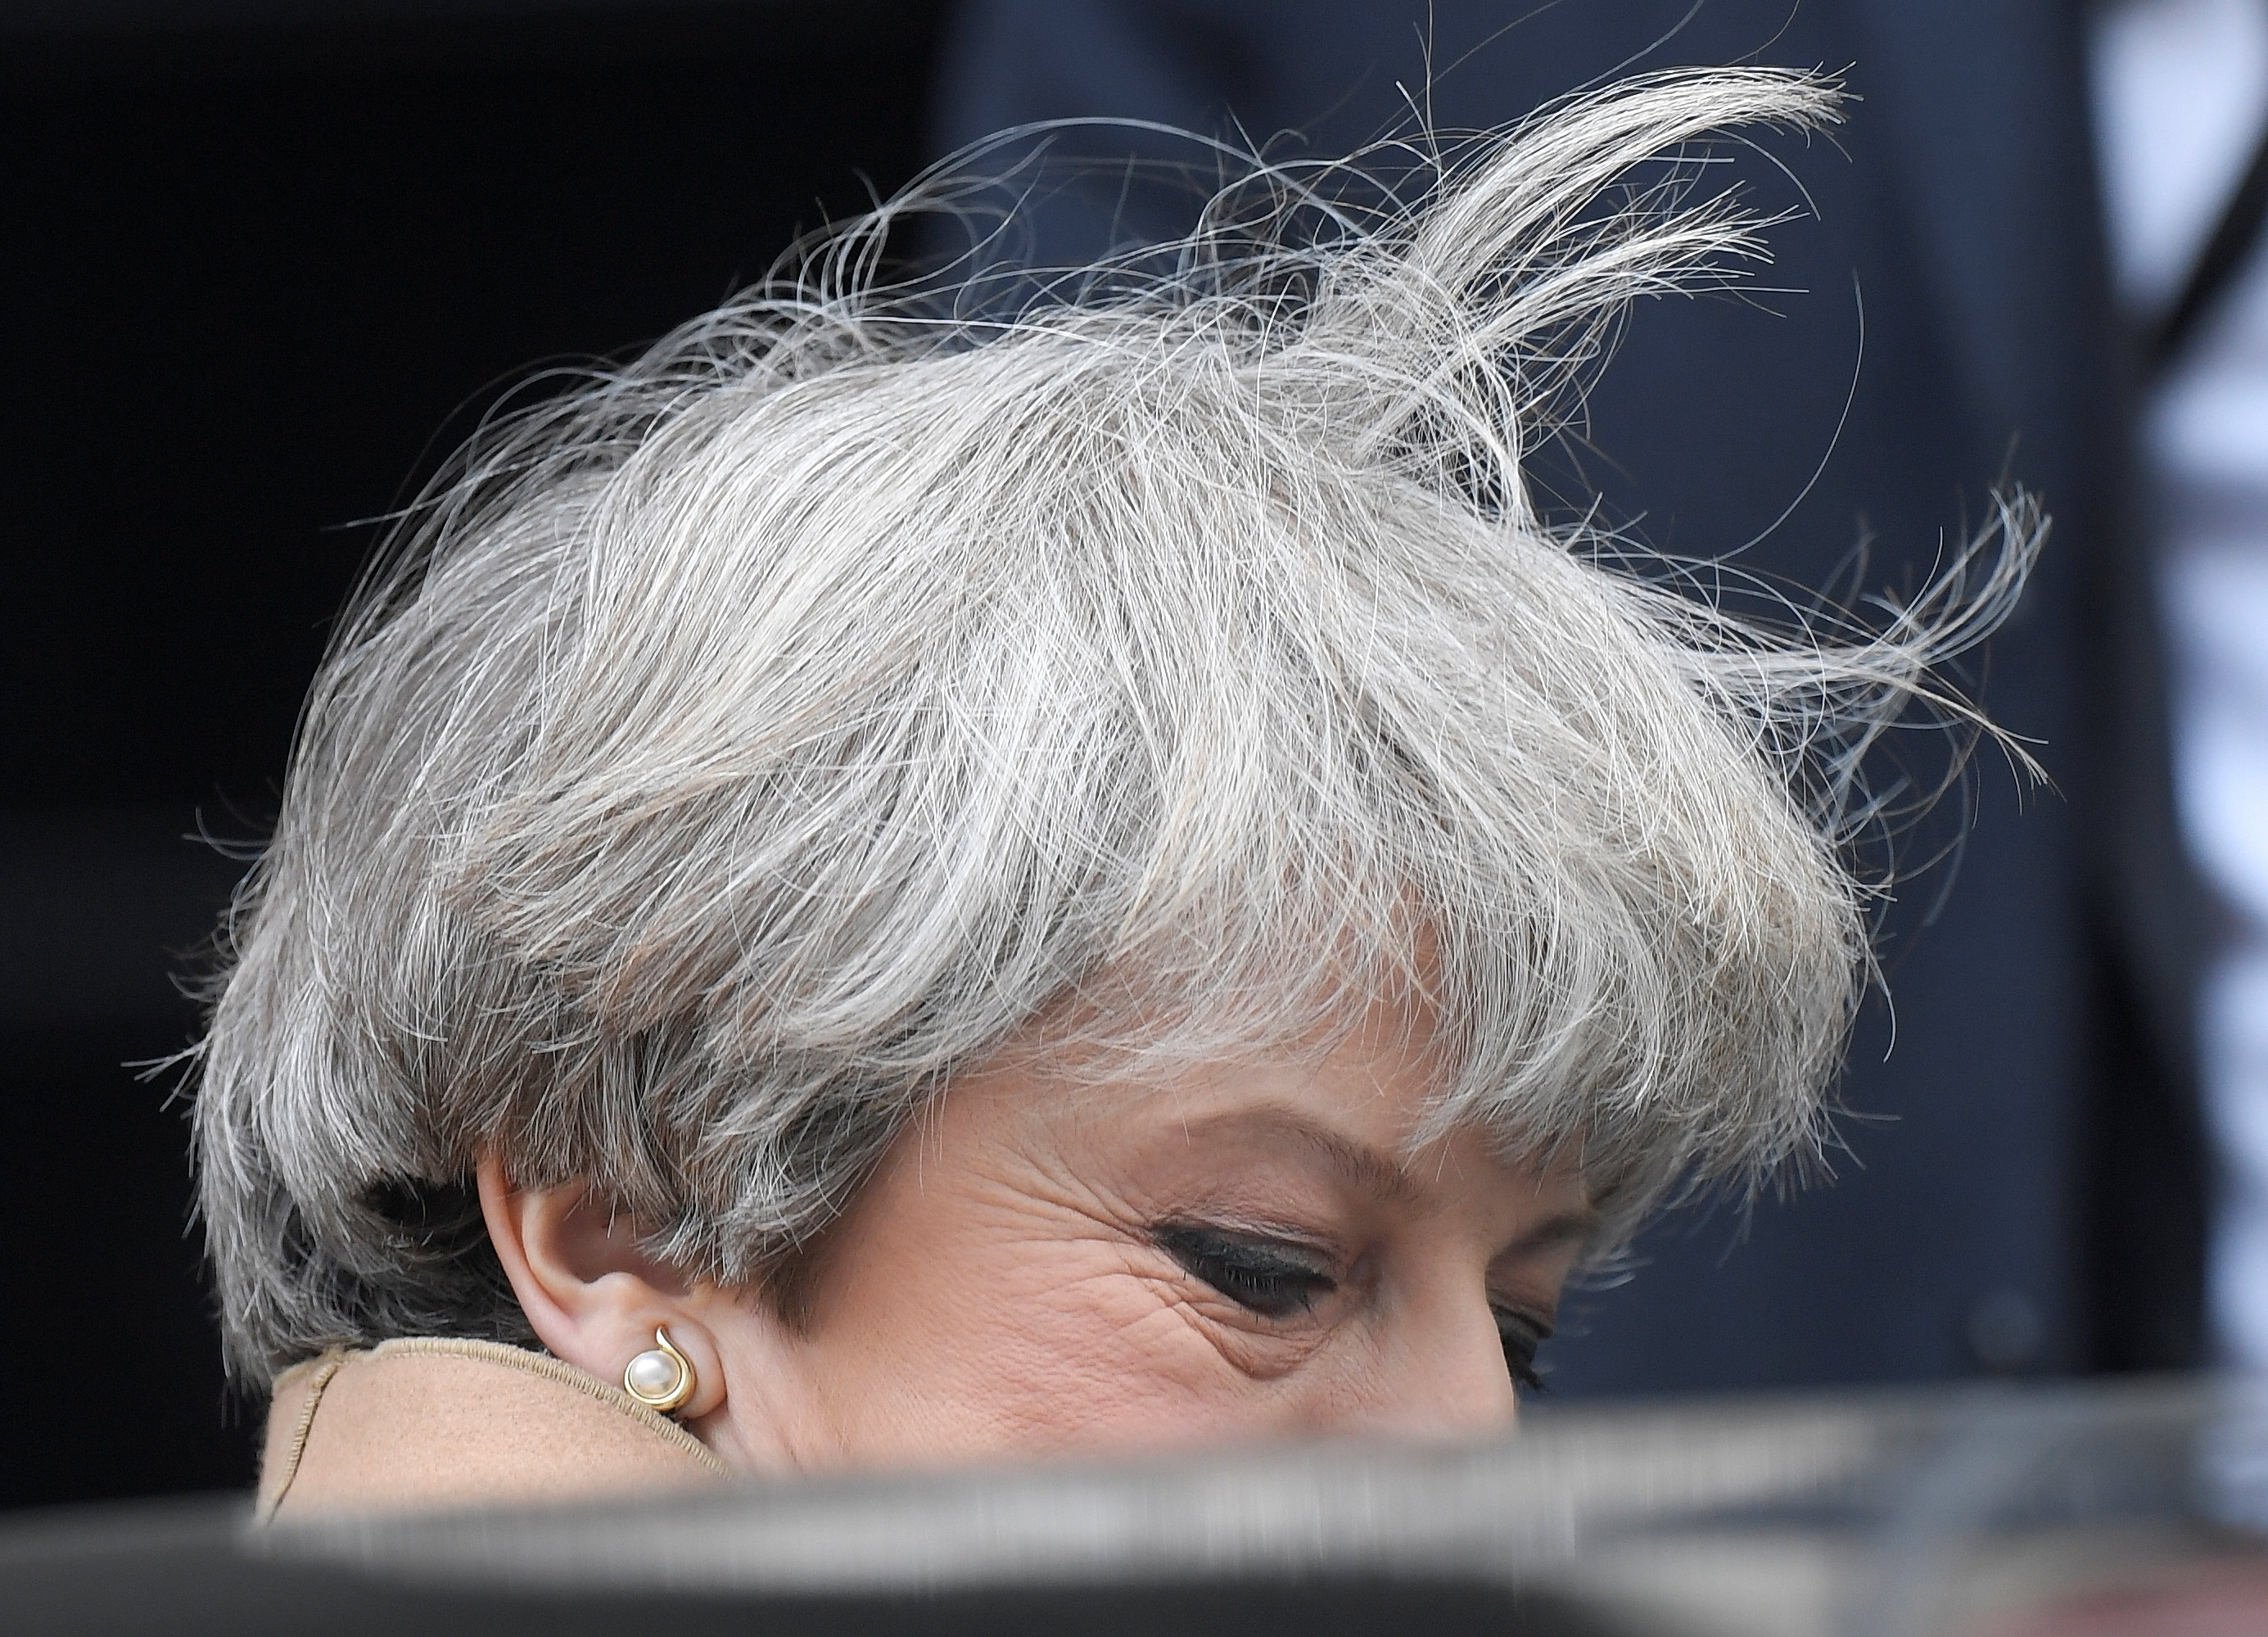 May's Conservatives take 23 point poll lead, matching Thatcher landslide